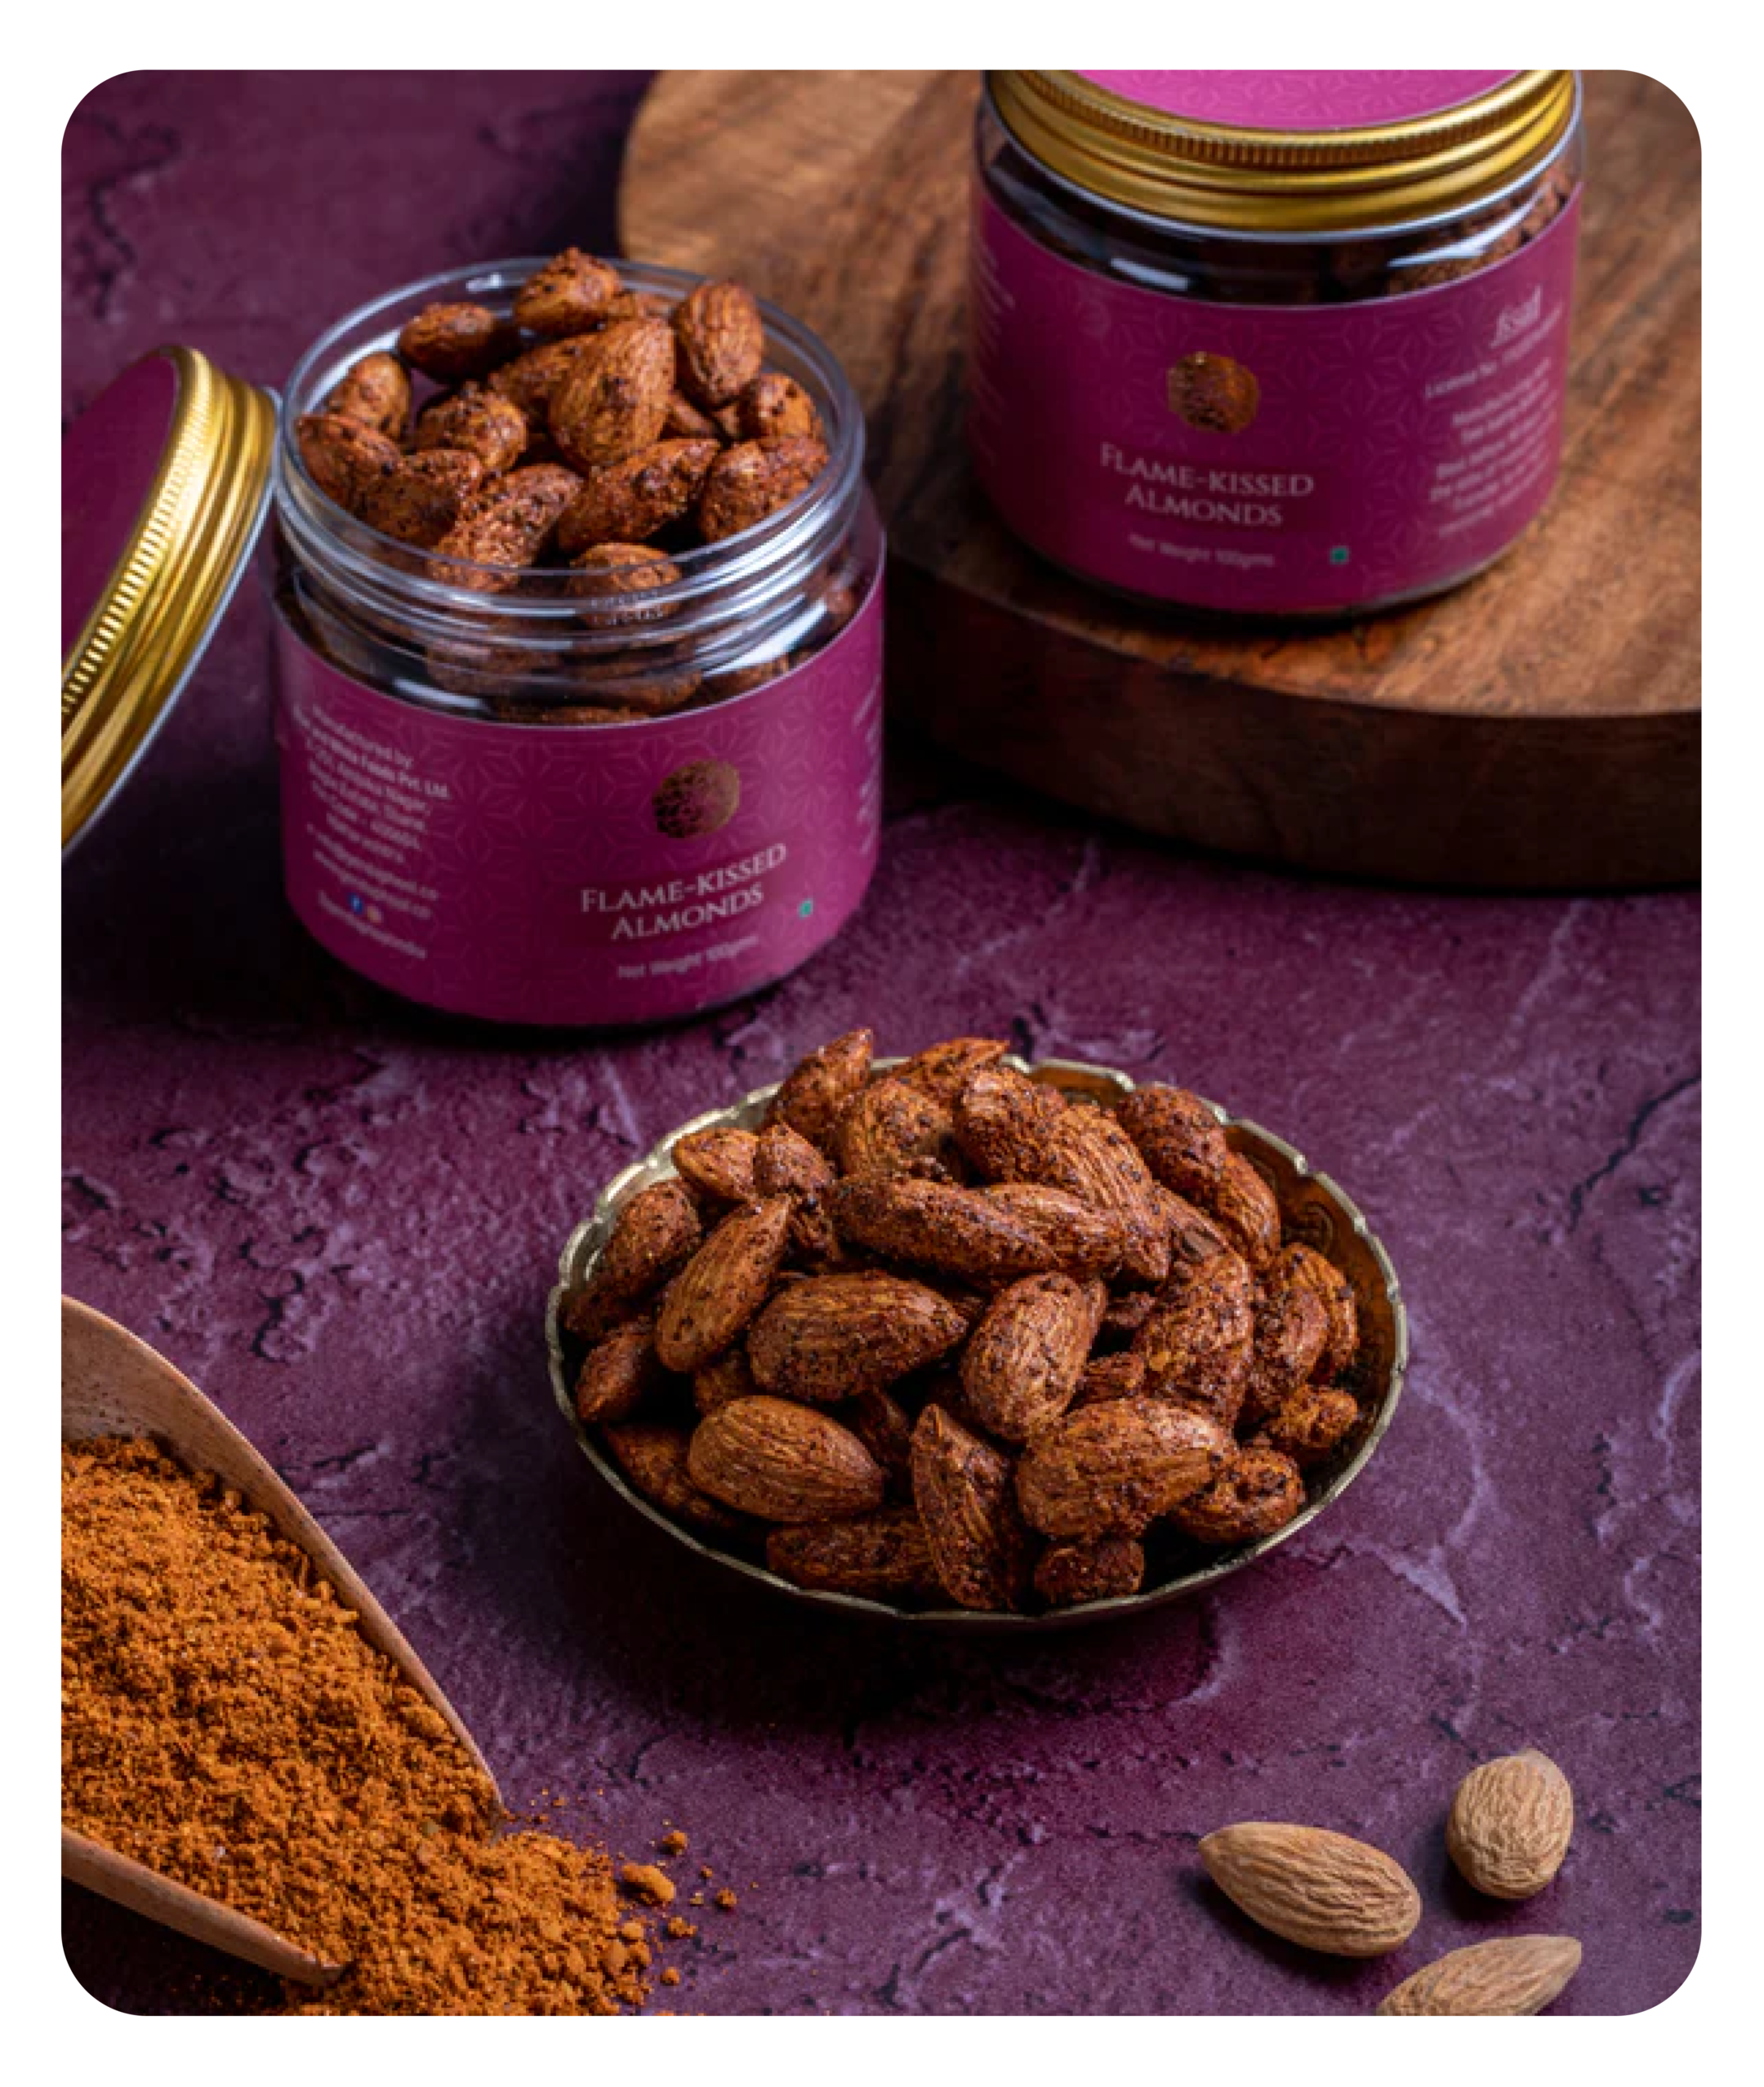 Flame-kissed Almonds